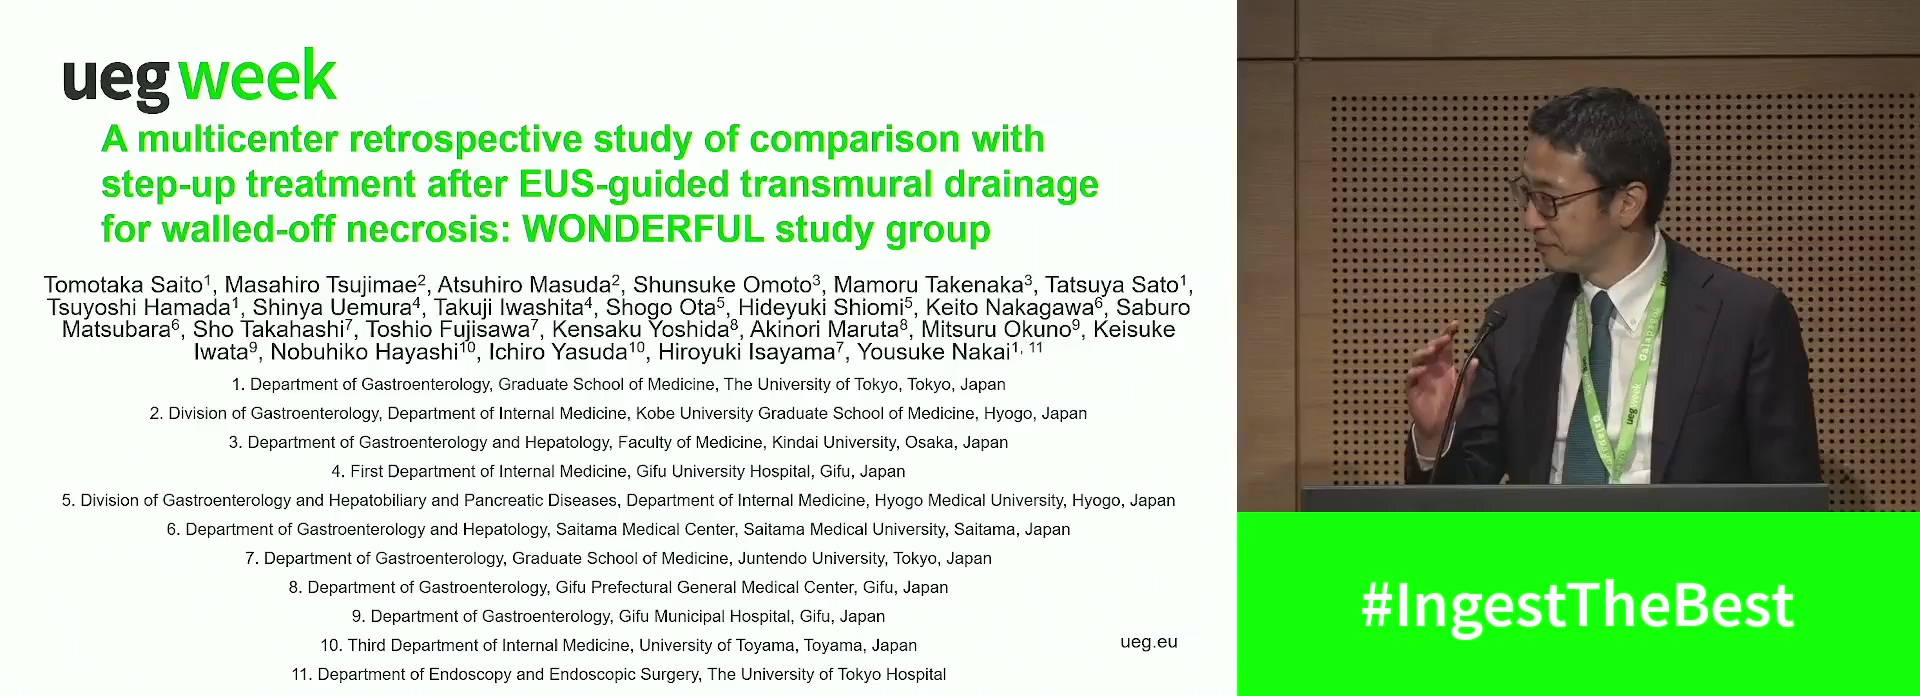 A MULTICENTER RETROSPECTIVE STUDY OF COMPARISON WITH STEP-UP TREATMENT AFTER EUS-GUIDED TRANSMURAL DRAINAGE FOR WALLED-OFF NECROSIS: WONDERFUL STUDY GROUP